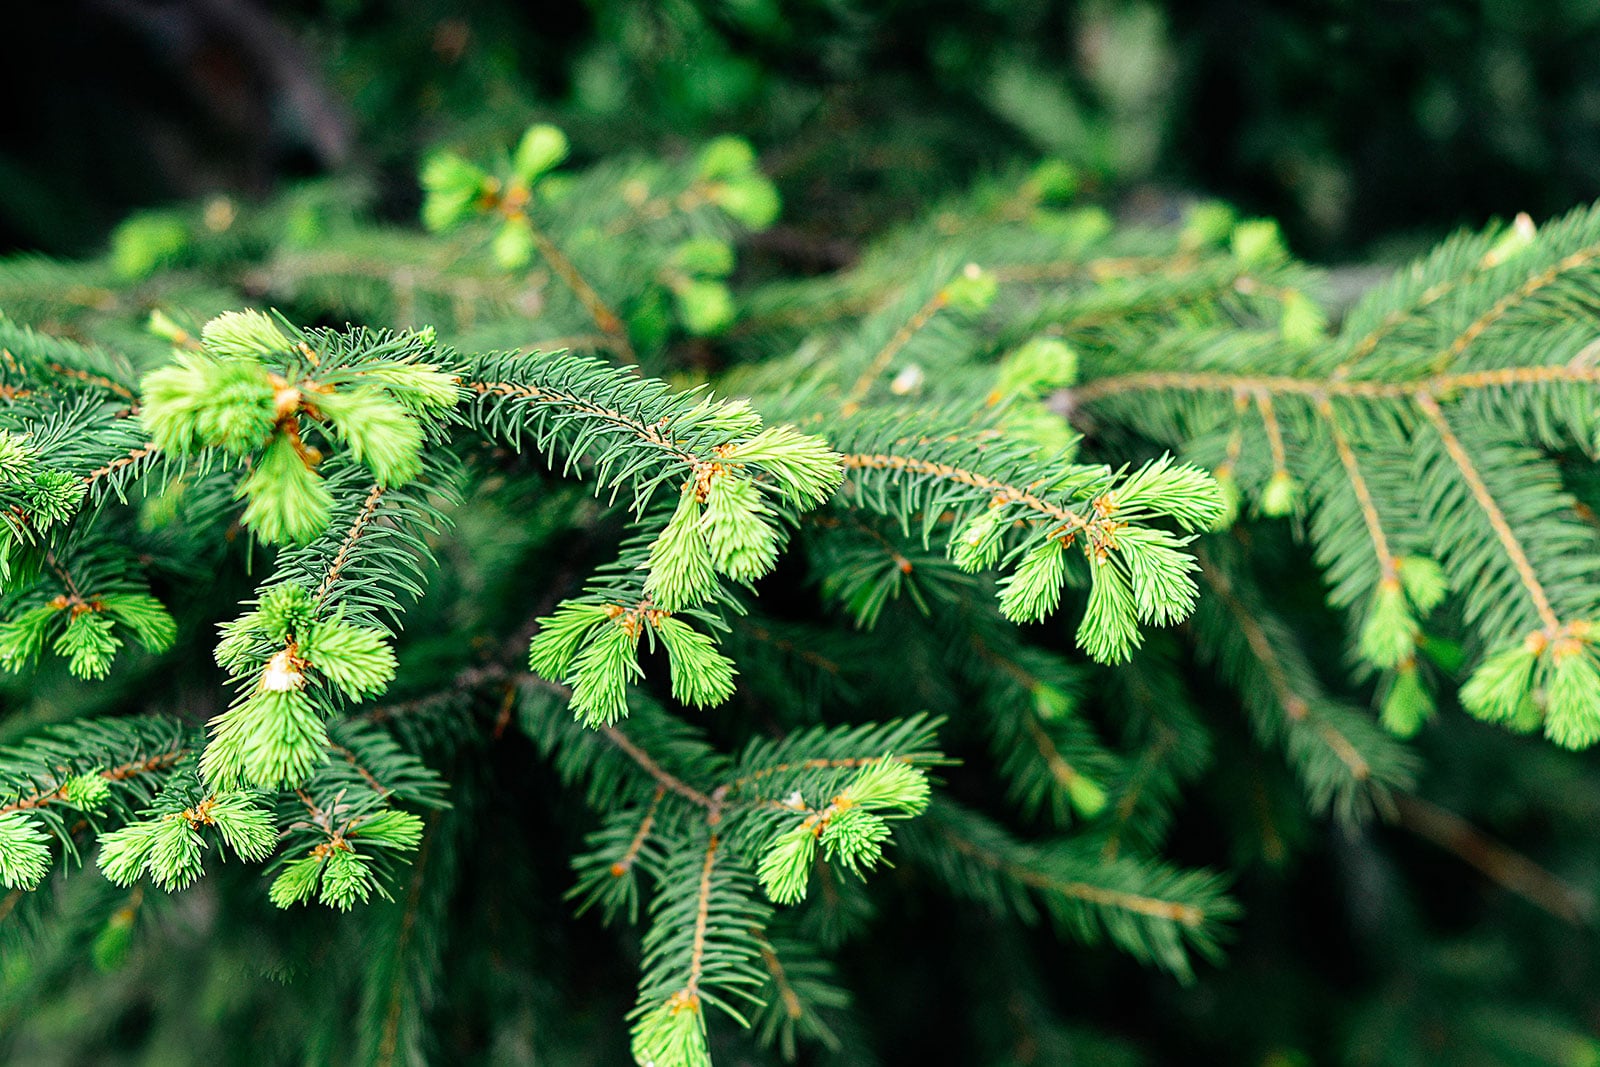 Fir tree with new growth on branch tips